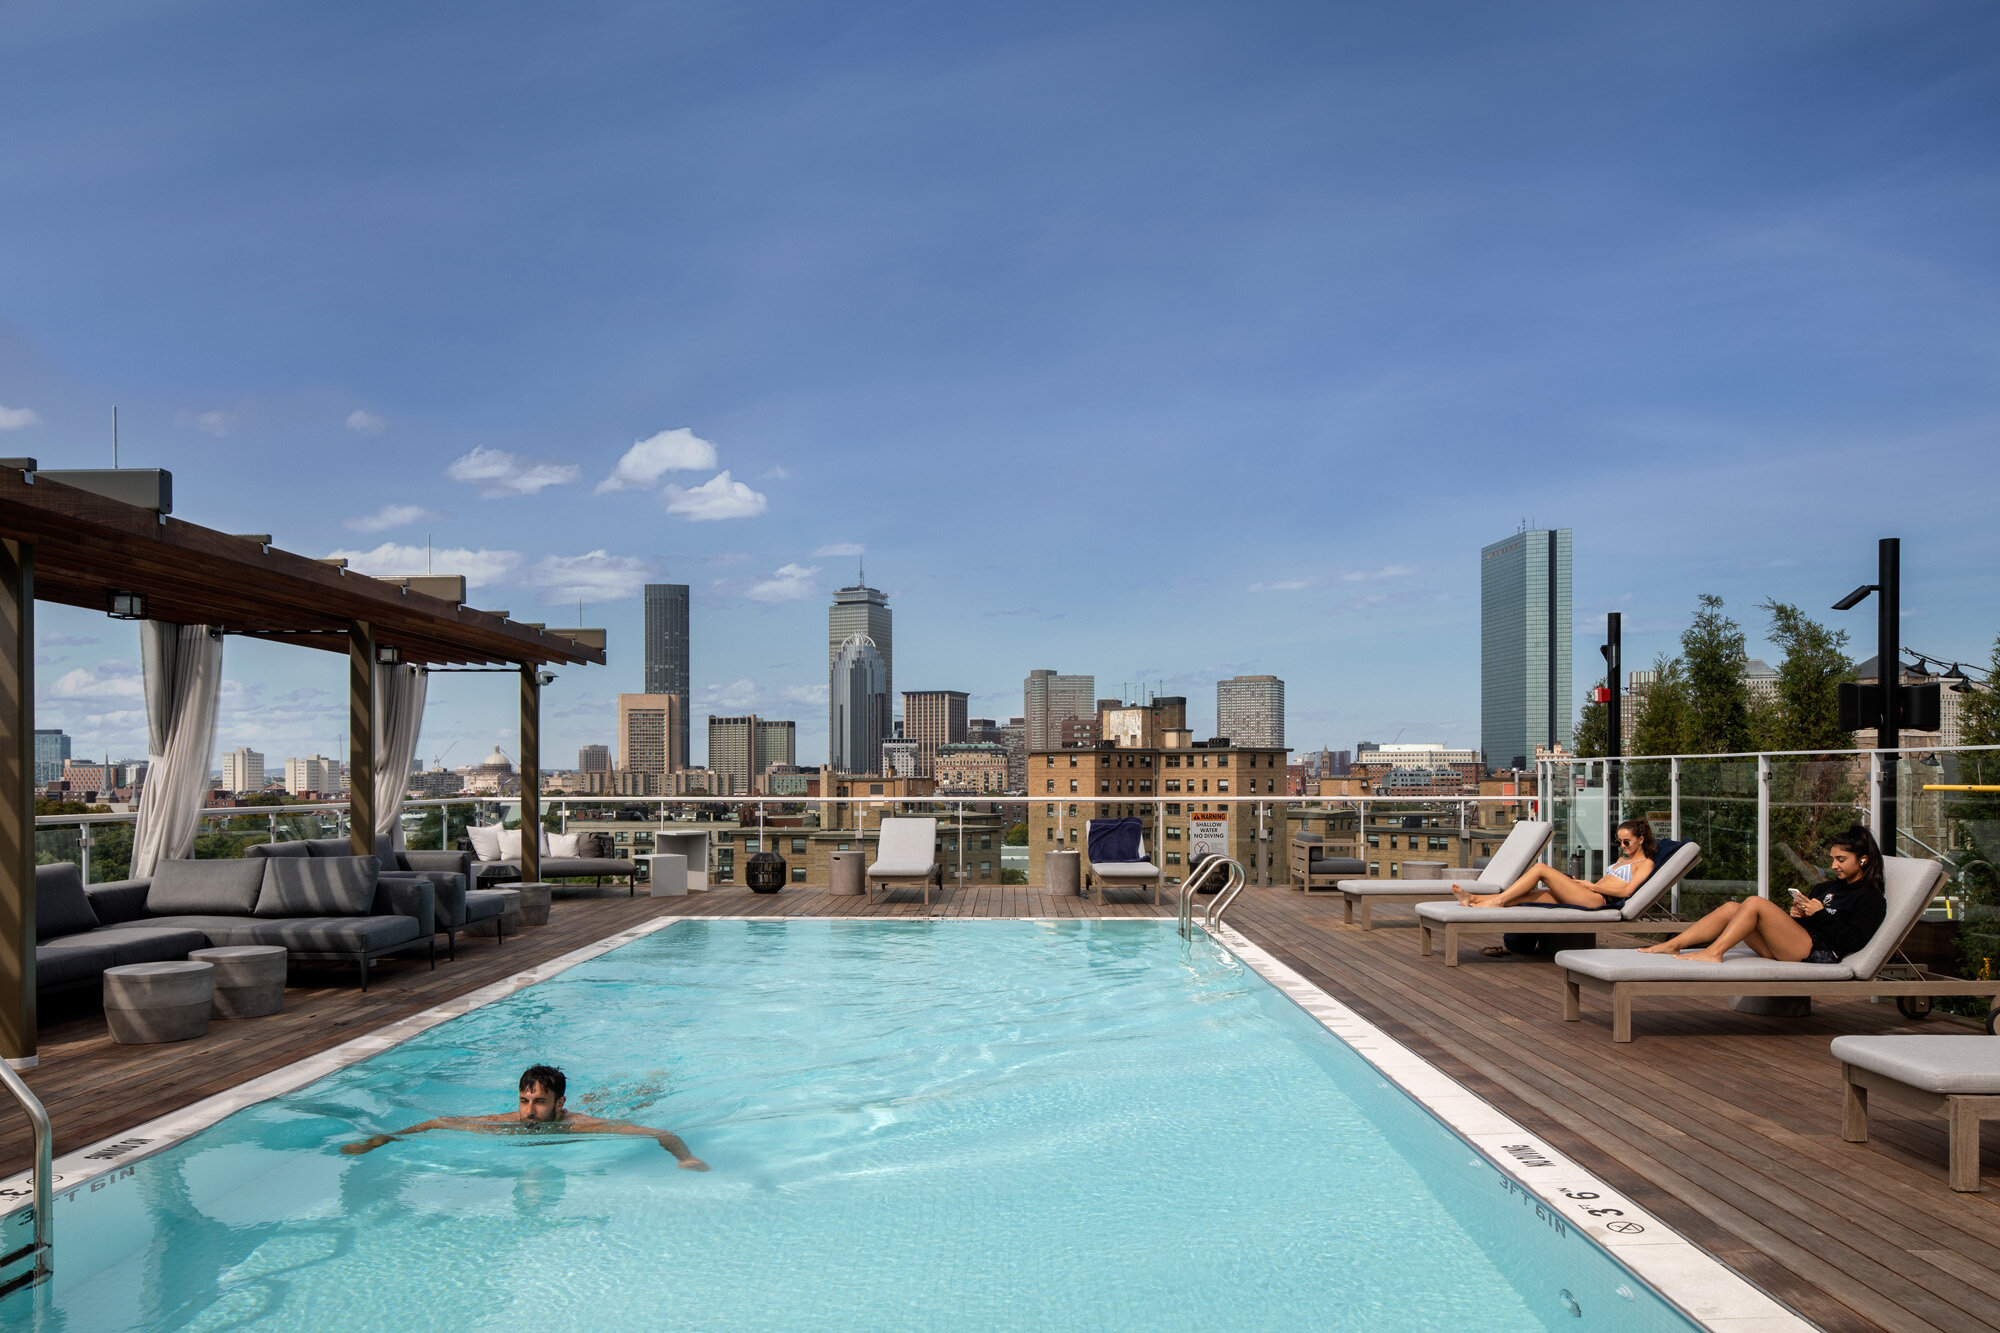  Rooftop pool at The Smith (photo by Ed Wonsek) 